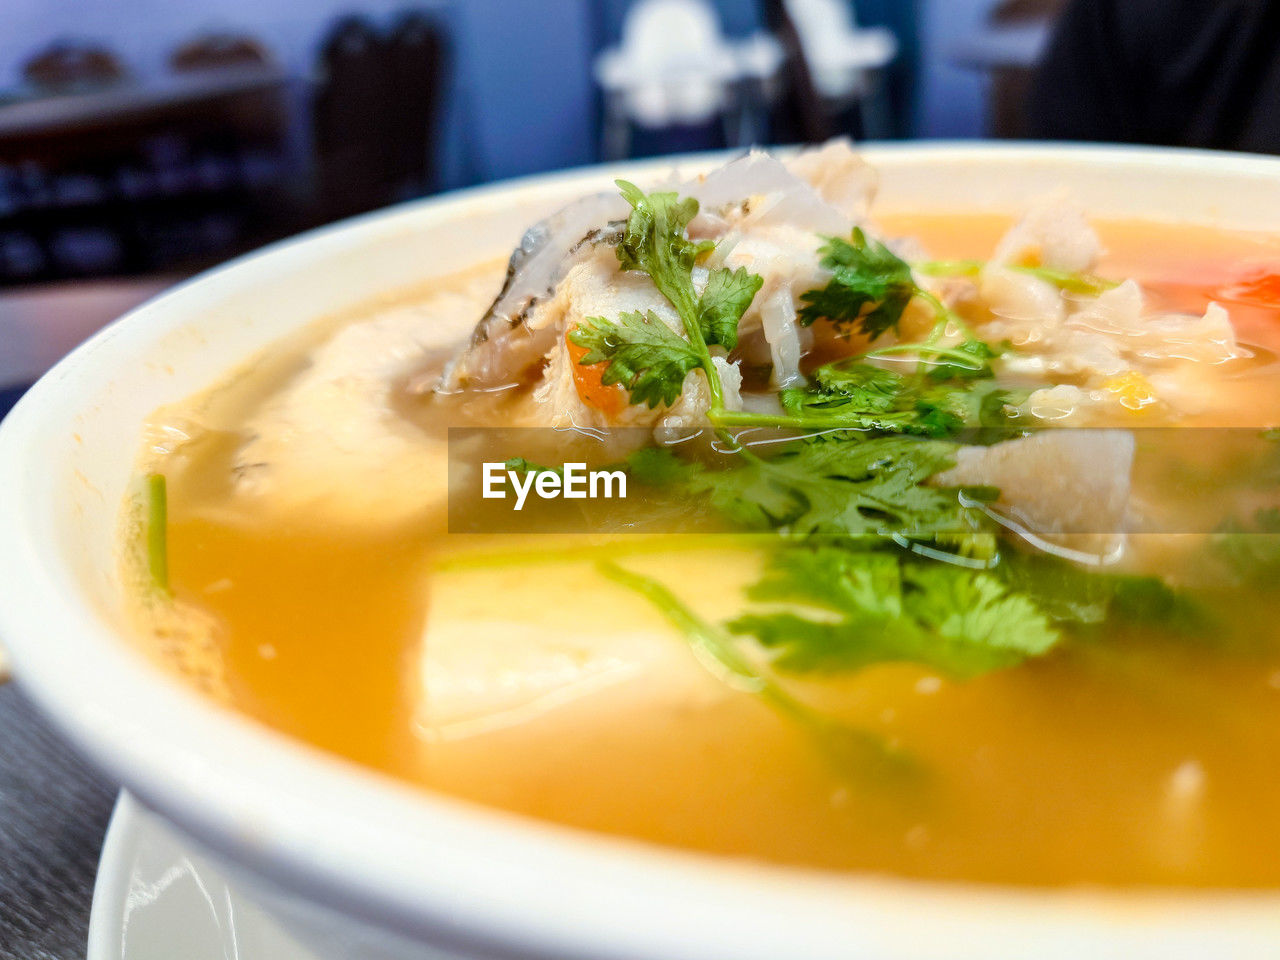 food and drink, food, soup, healthy eating, dish, wellbeing, bowl, cuisine, meal, asian food, vegetable, restaurant, freshness, close-up, business, meat, indoors, no people, stew, herb, dinner, table, crockery, selective focus, lunch, kitchen utensil, pasta, chinese food, city, seafood, japanese food